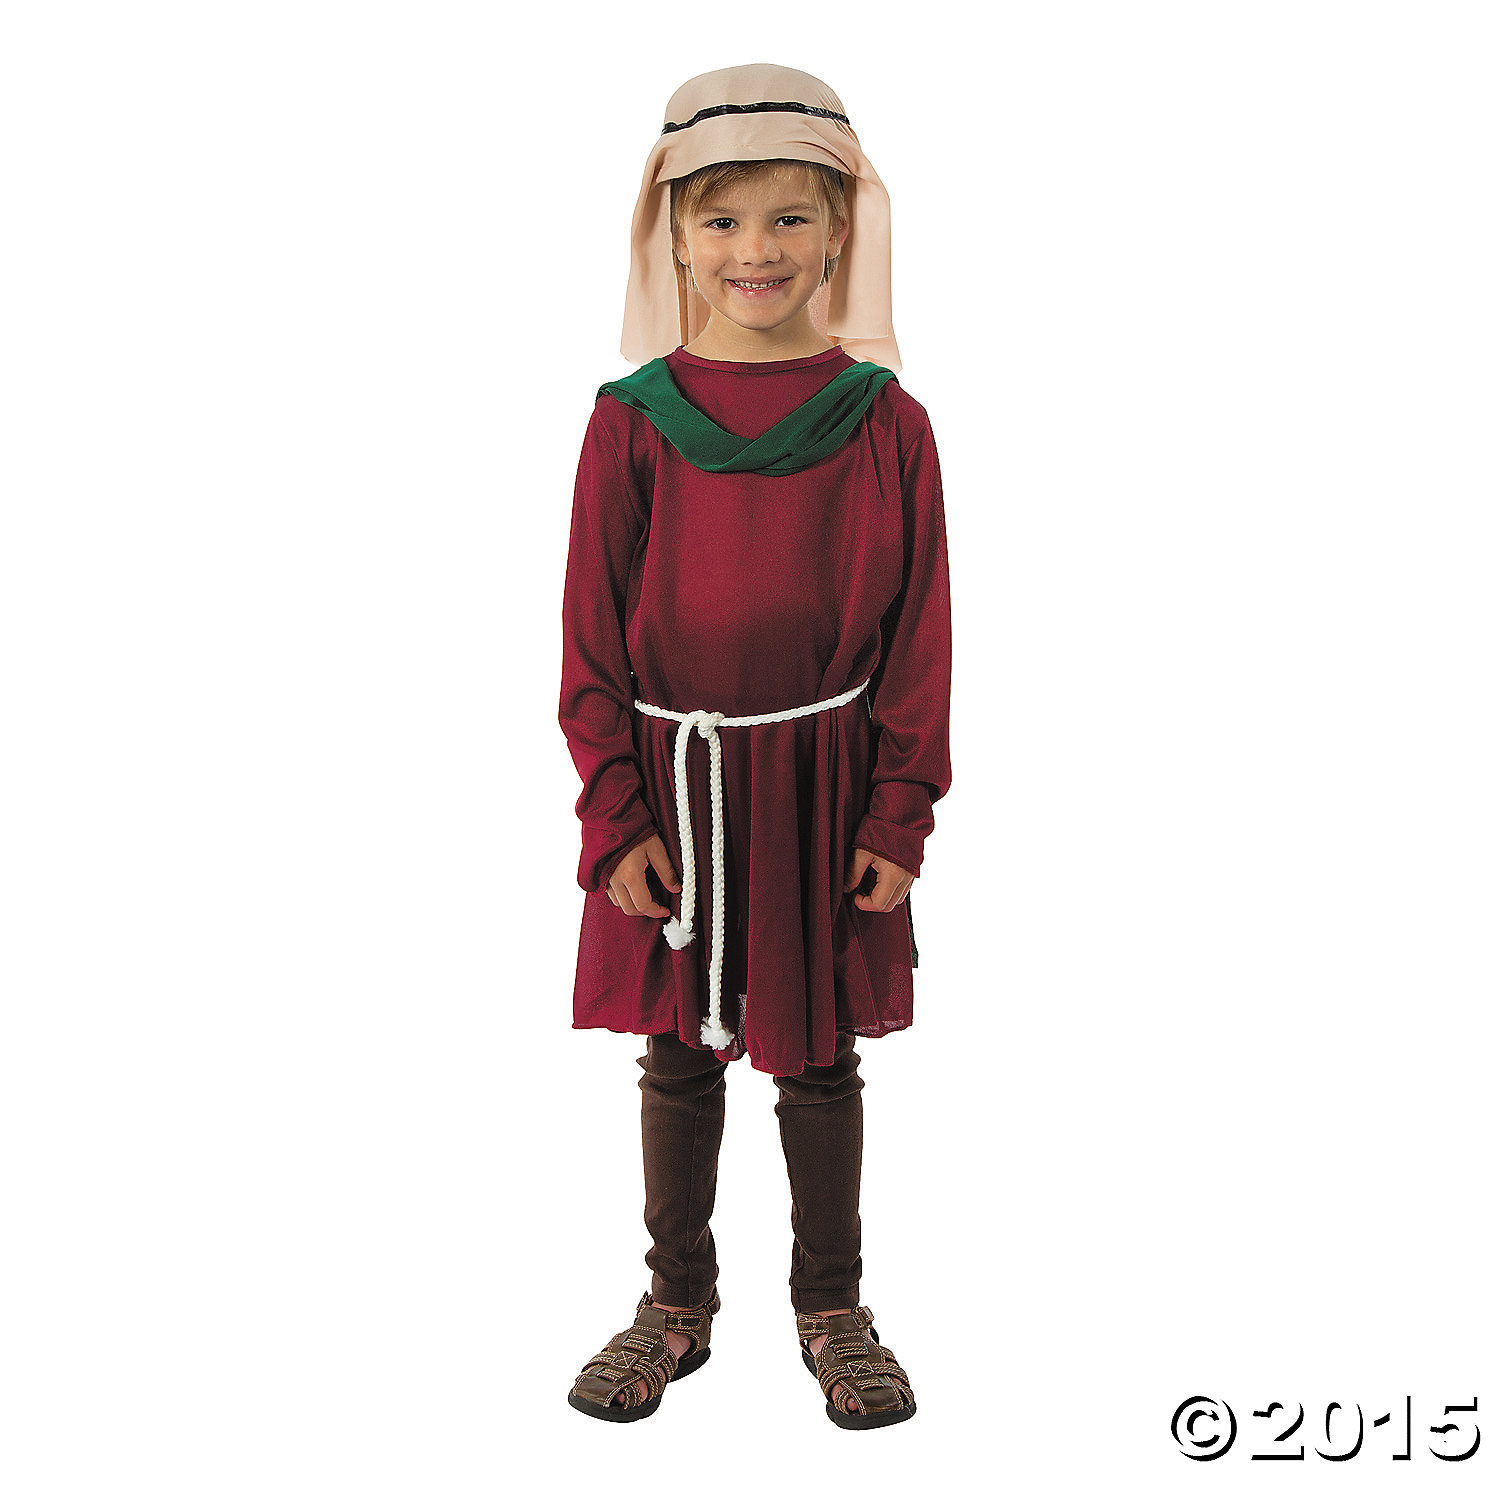 villager outfit nativity